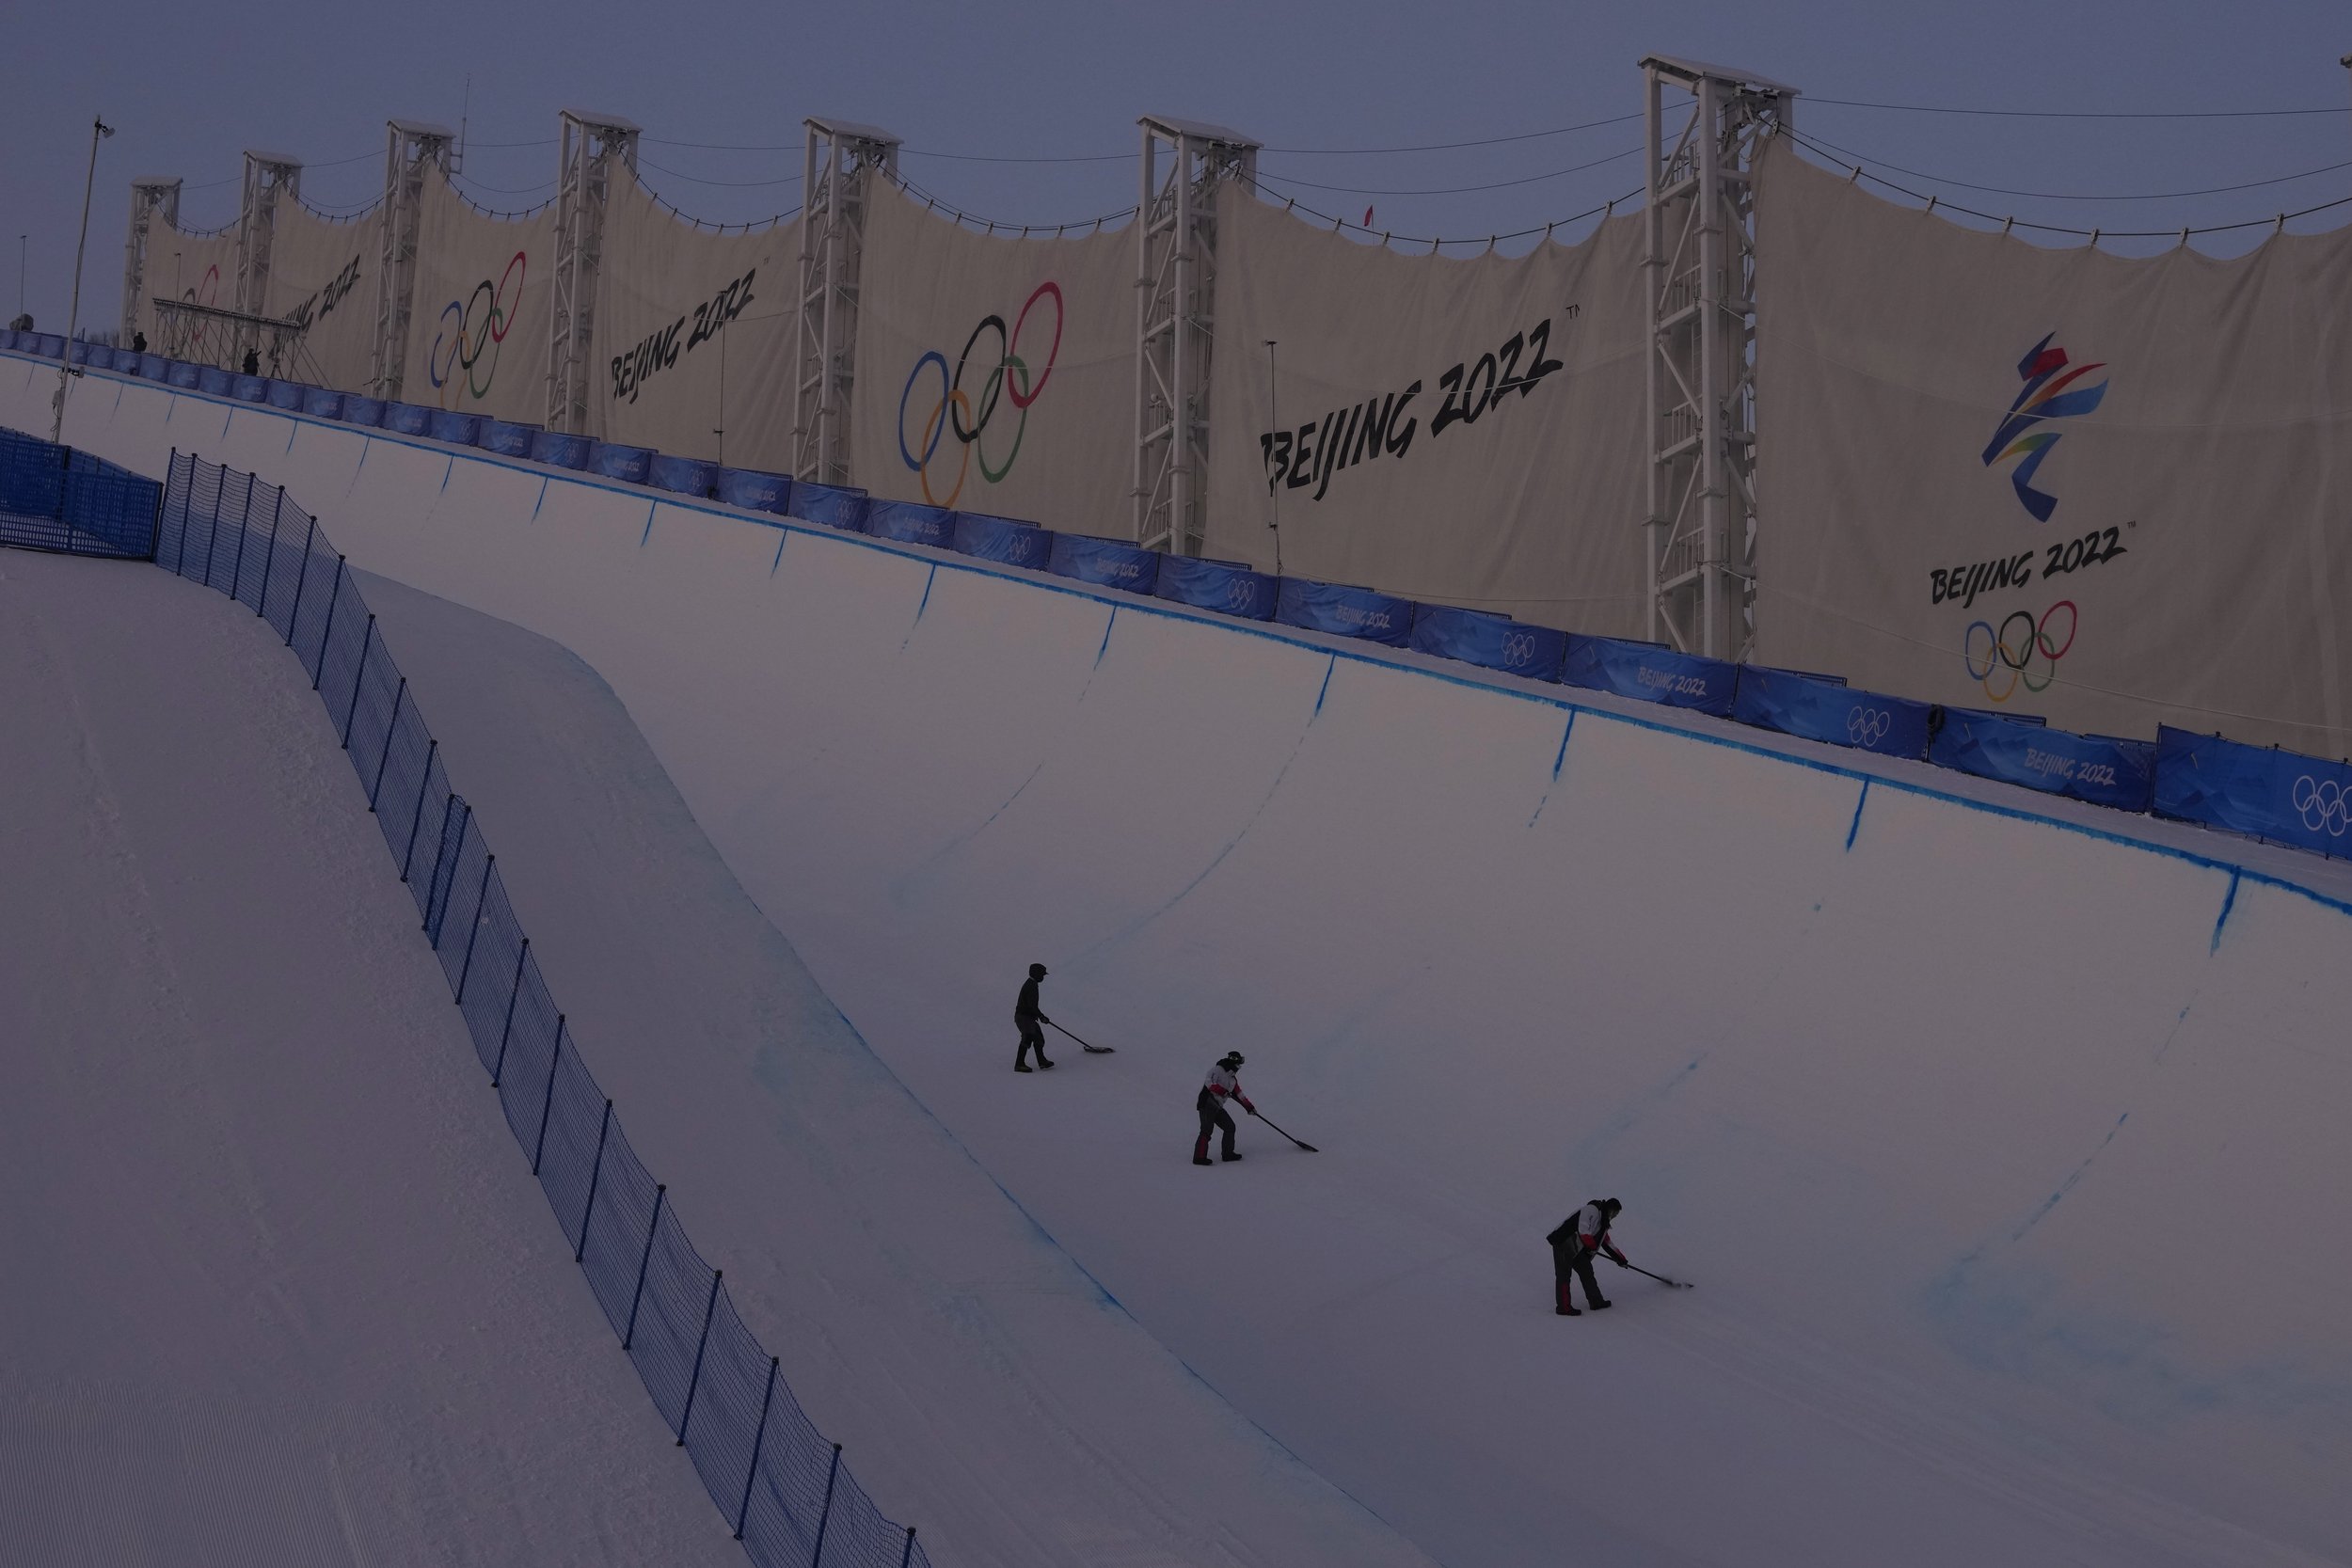  Workers prepare the halfpipe course at Genting Snow Park before the women's halfpipe finals at the 2022 Winter Olympics, Thursday, Feb. 10, 2022, in Zhangjiakou, China. (AP Photo/Kiichiro Sato) 